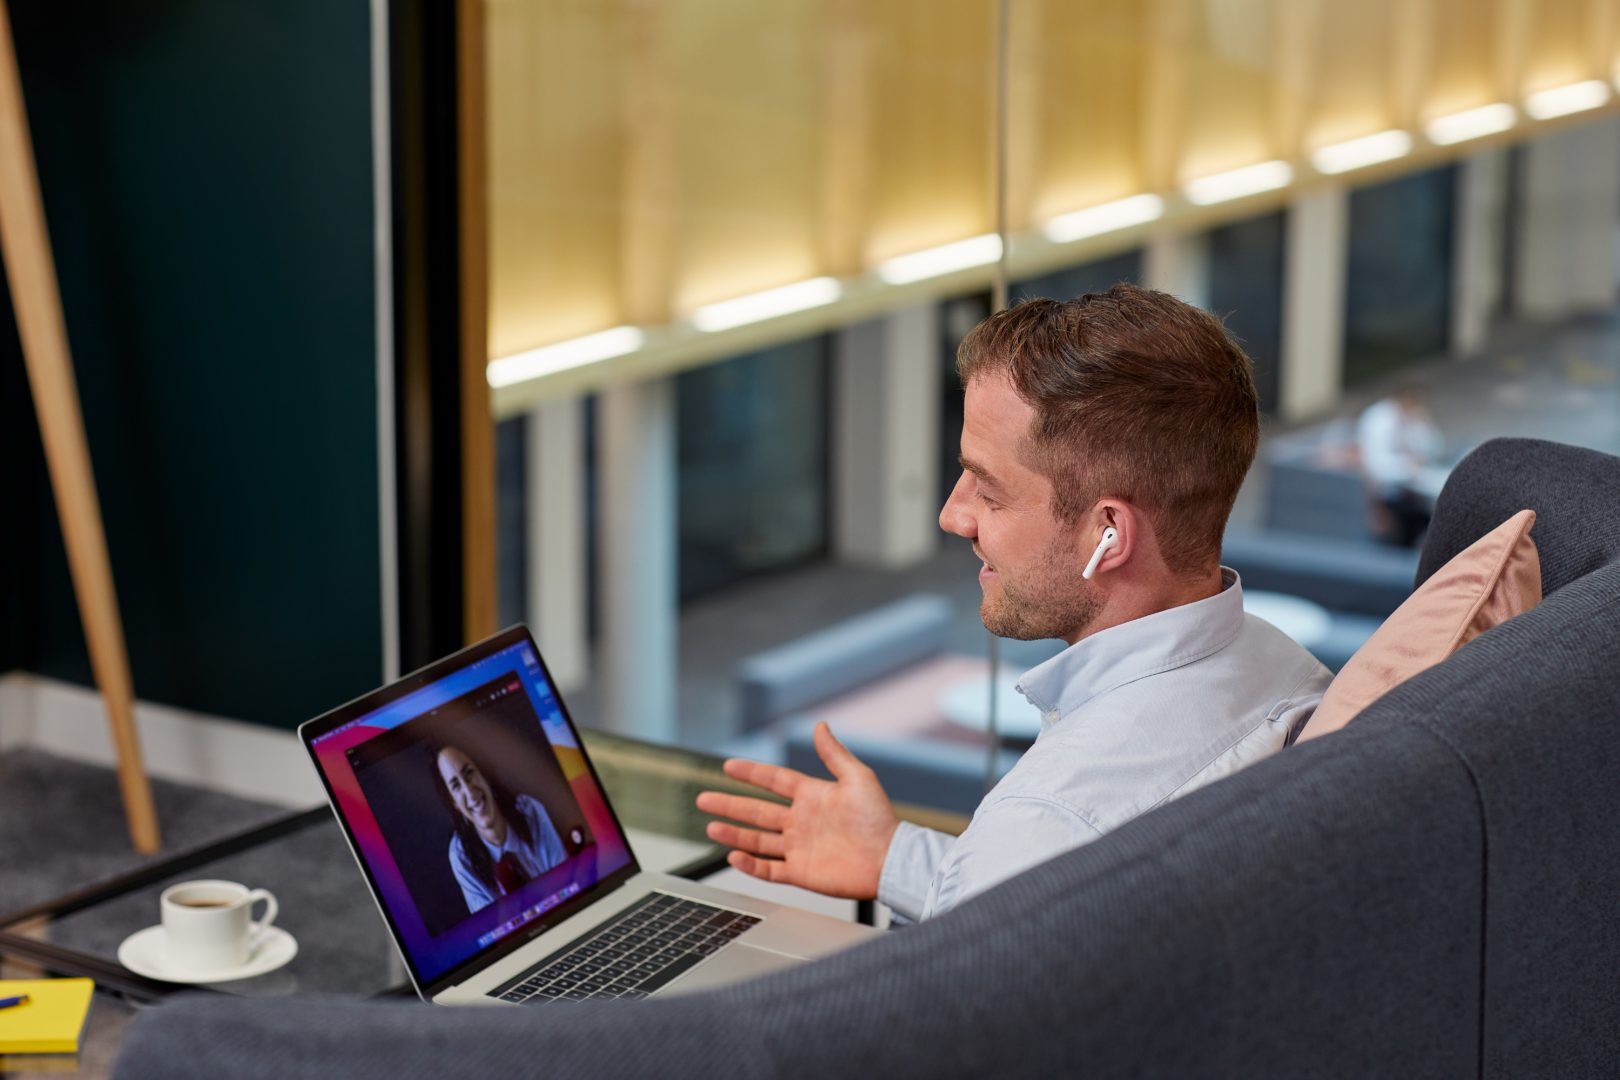 A man answering a video call on his laptop